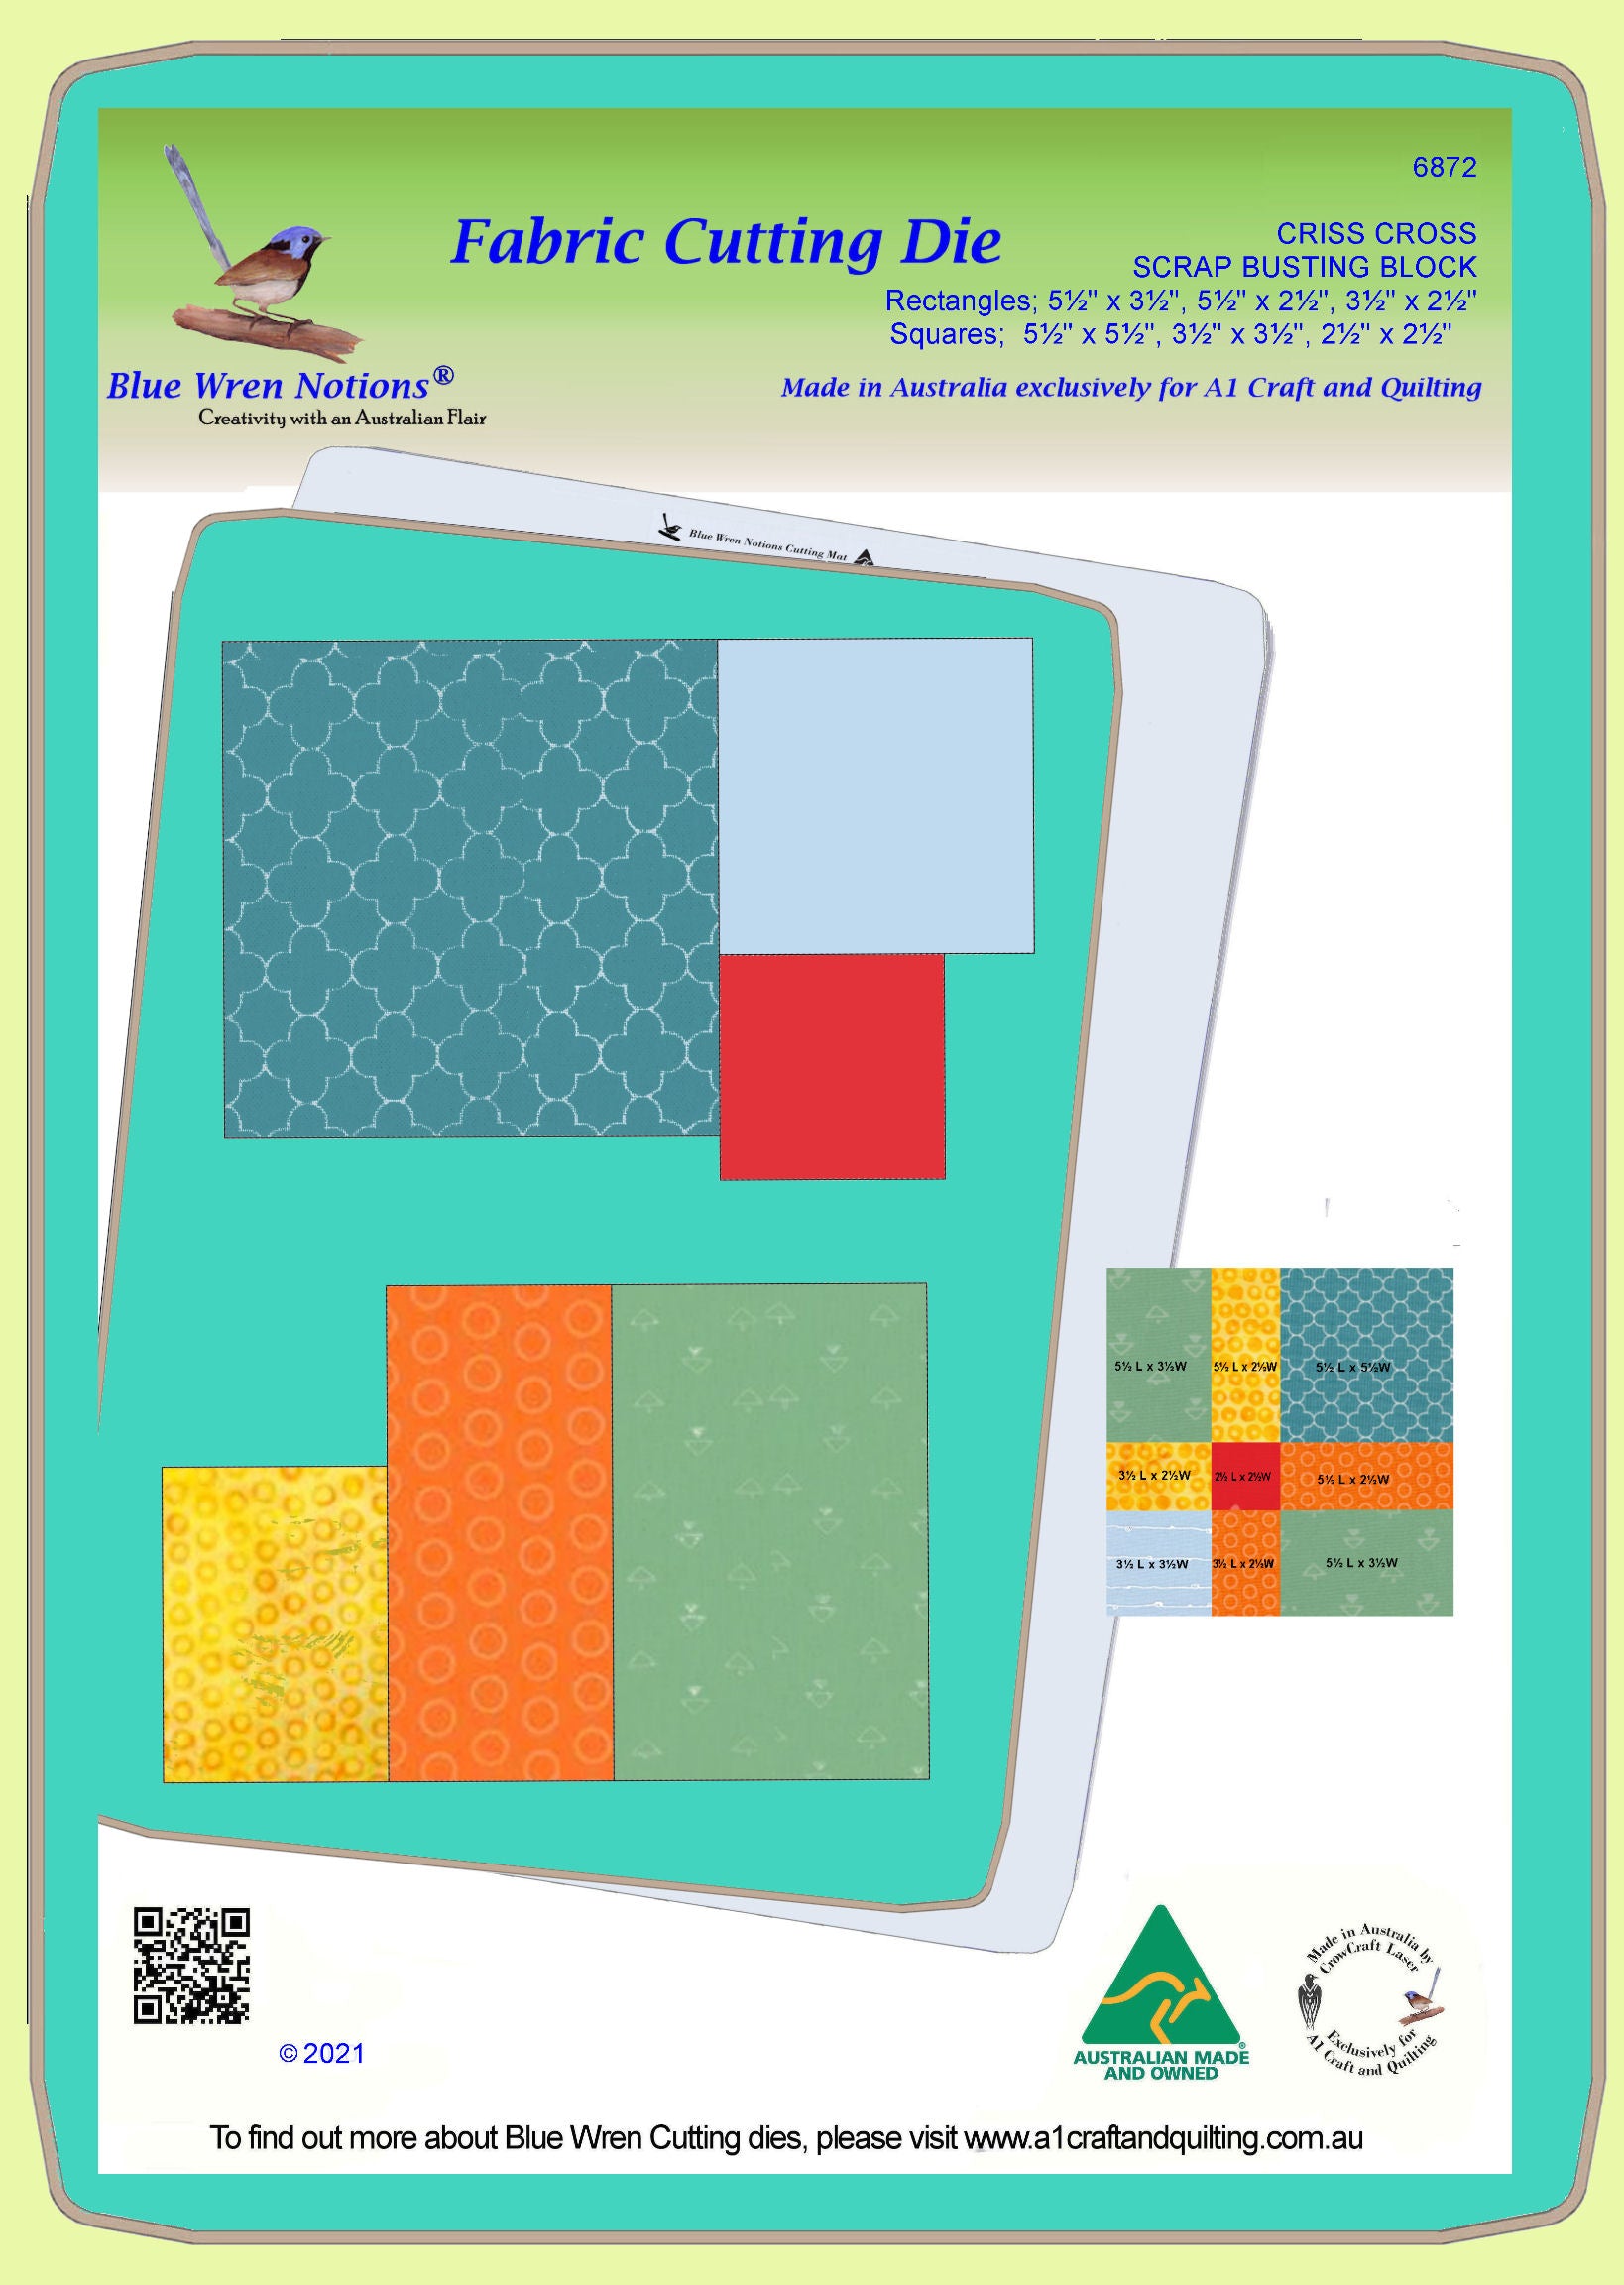 Criss Cross  Scrap Buster 10"finished block- 9004, was 6872 -  mat included